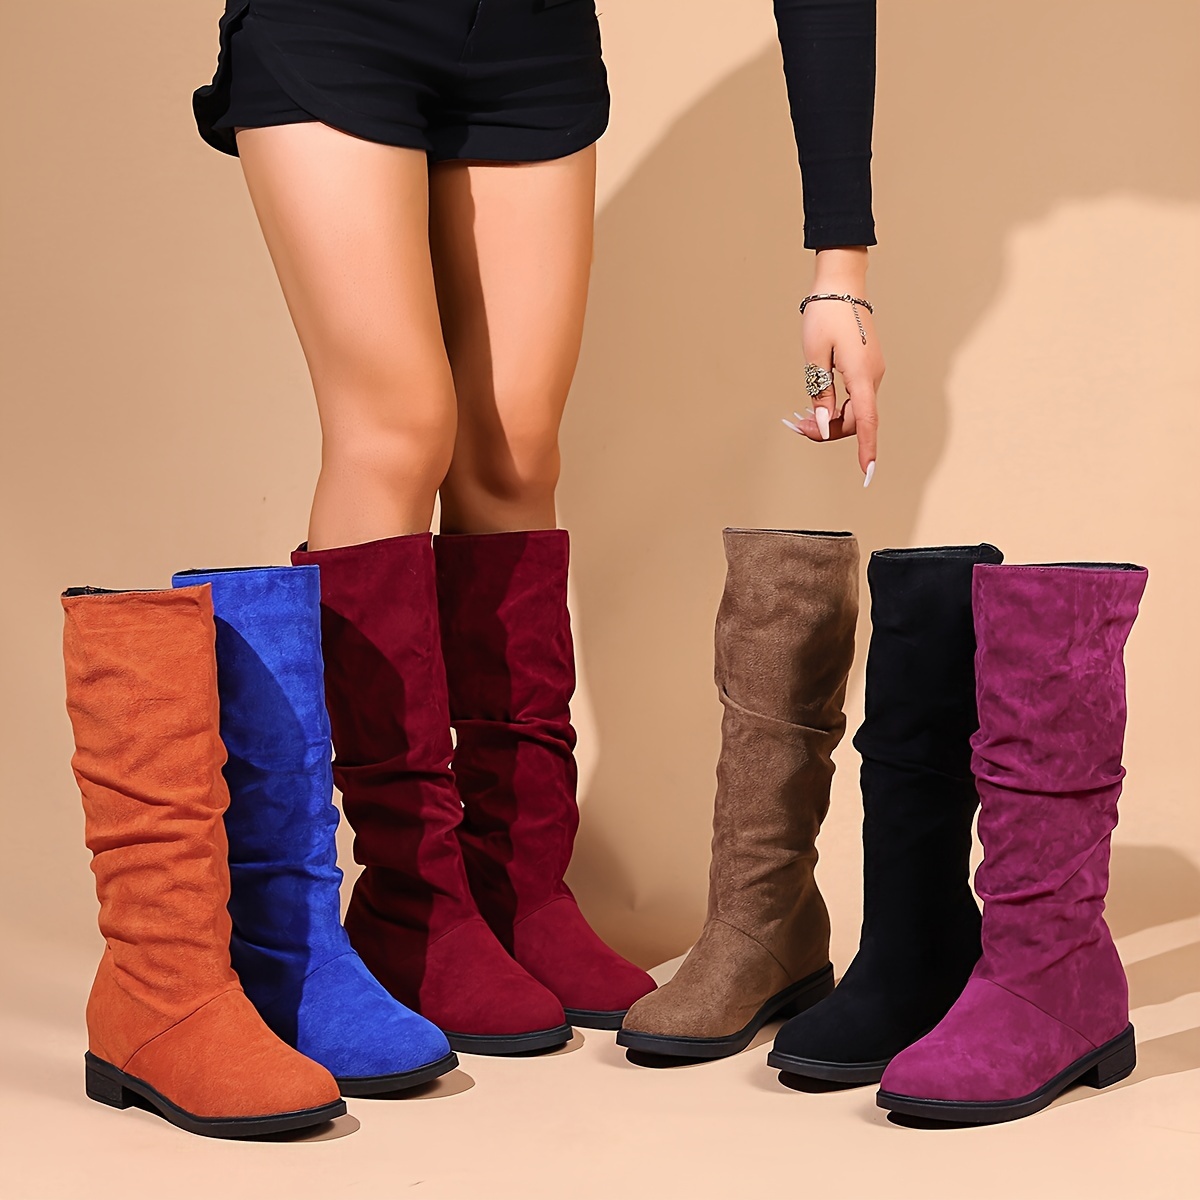 Women's Thin Heeled Mid Calf Boots, Pointed Toe Stretch Slip On